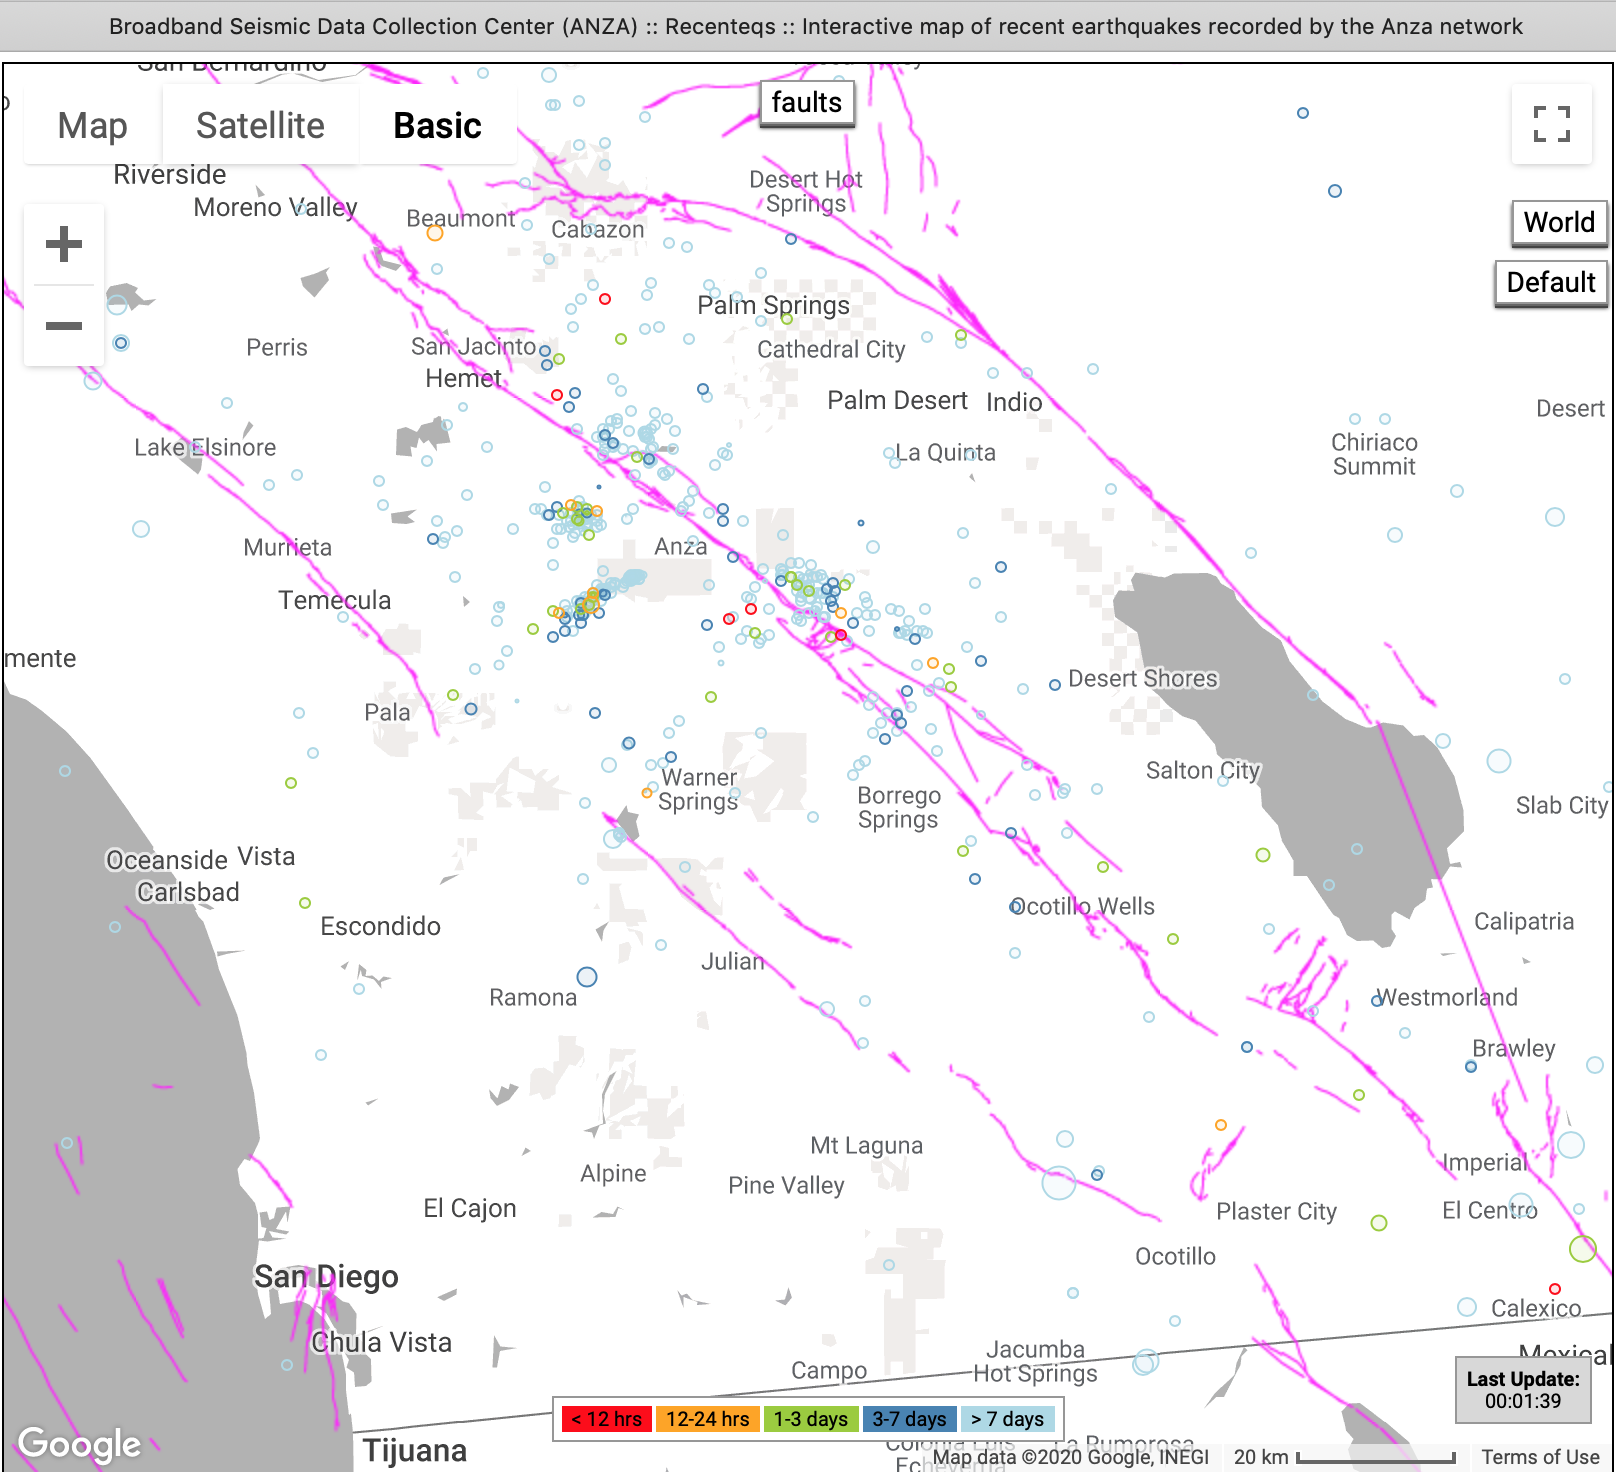 Google map showing recent earthquakes located in Southern Californa by the Anza seismic network